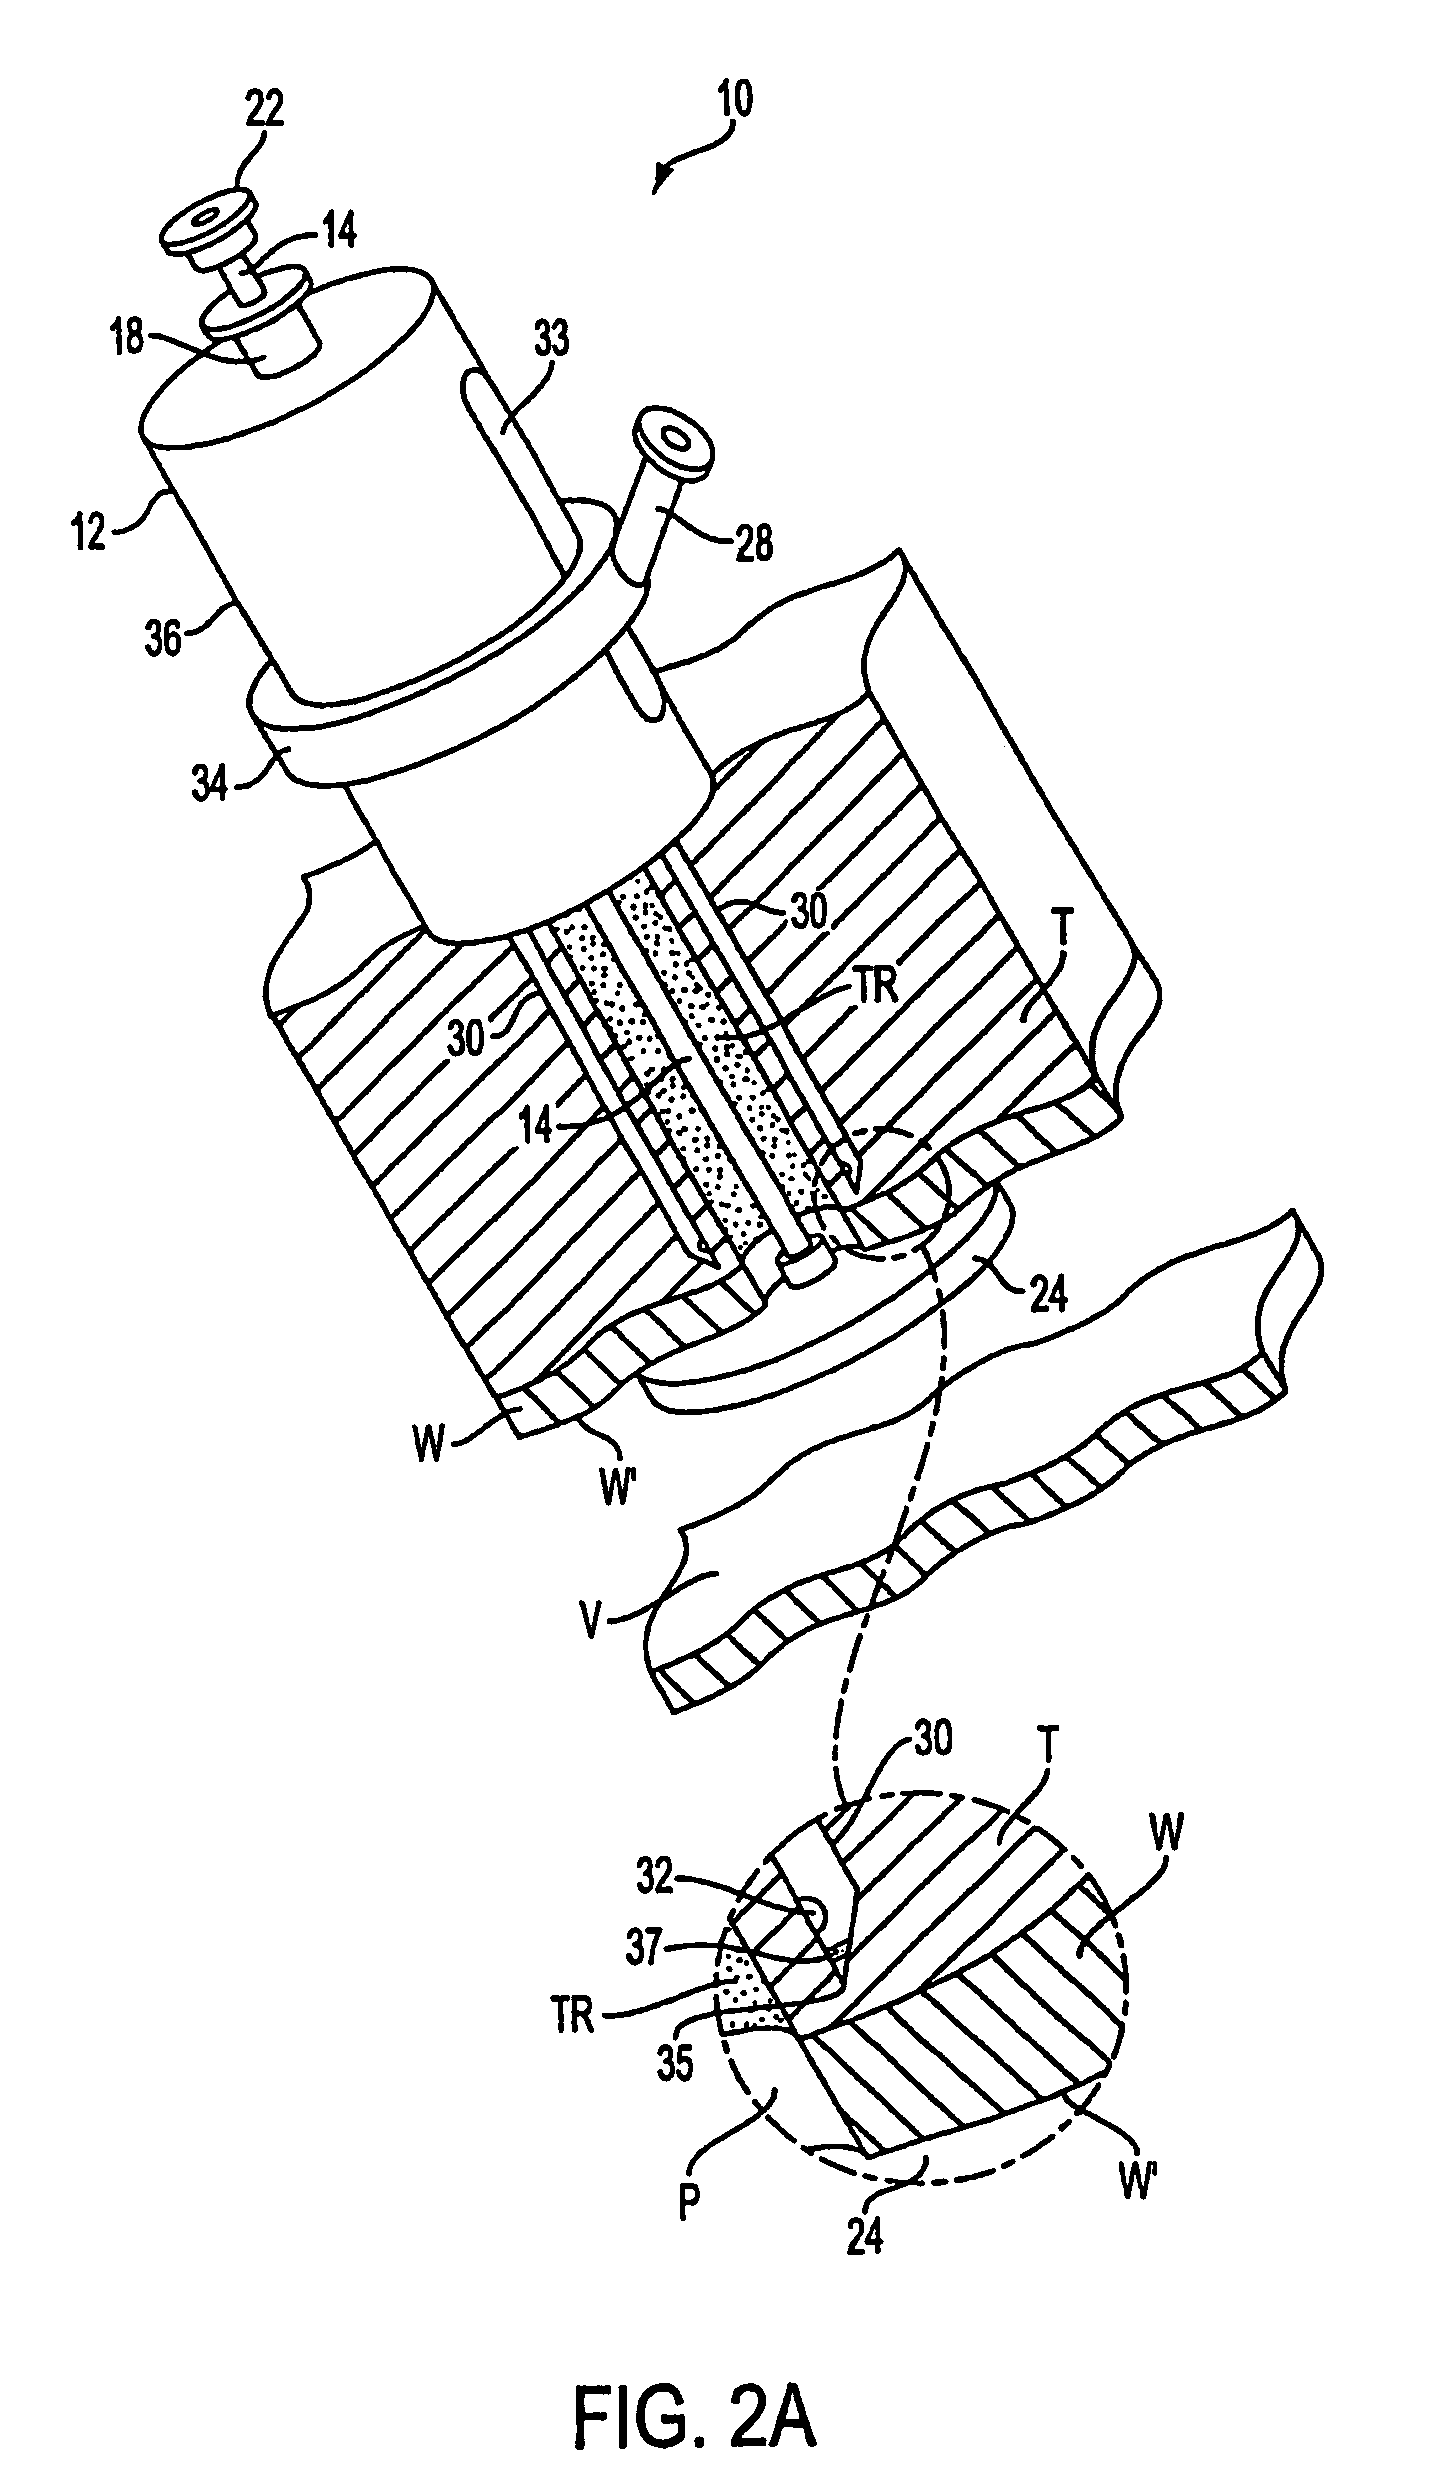 Apparatus for sealing a puncture by causing a reduction in the circumference of the puncture